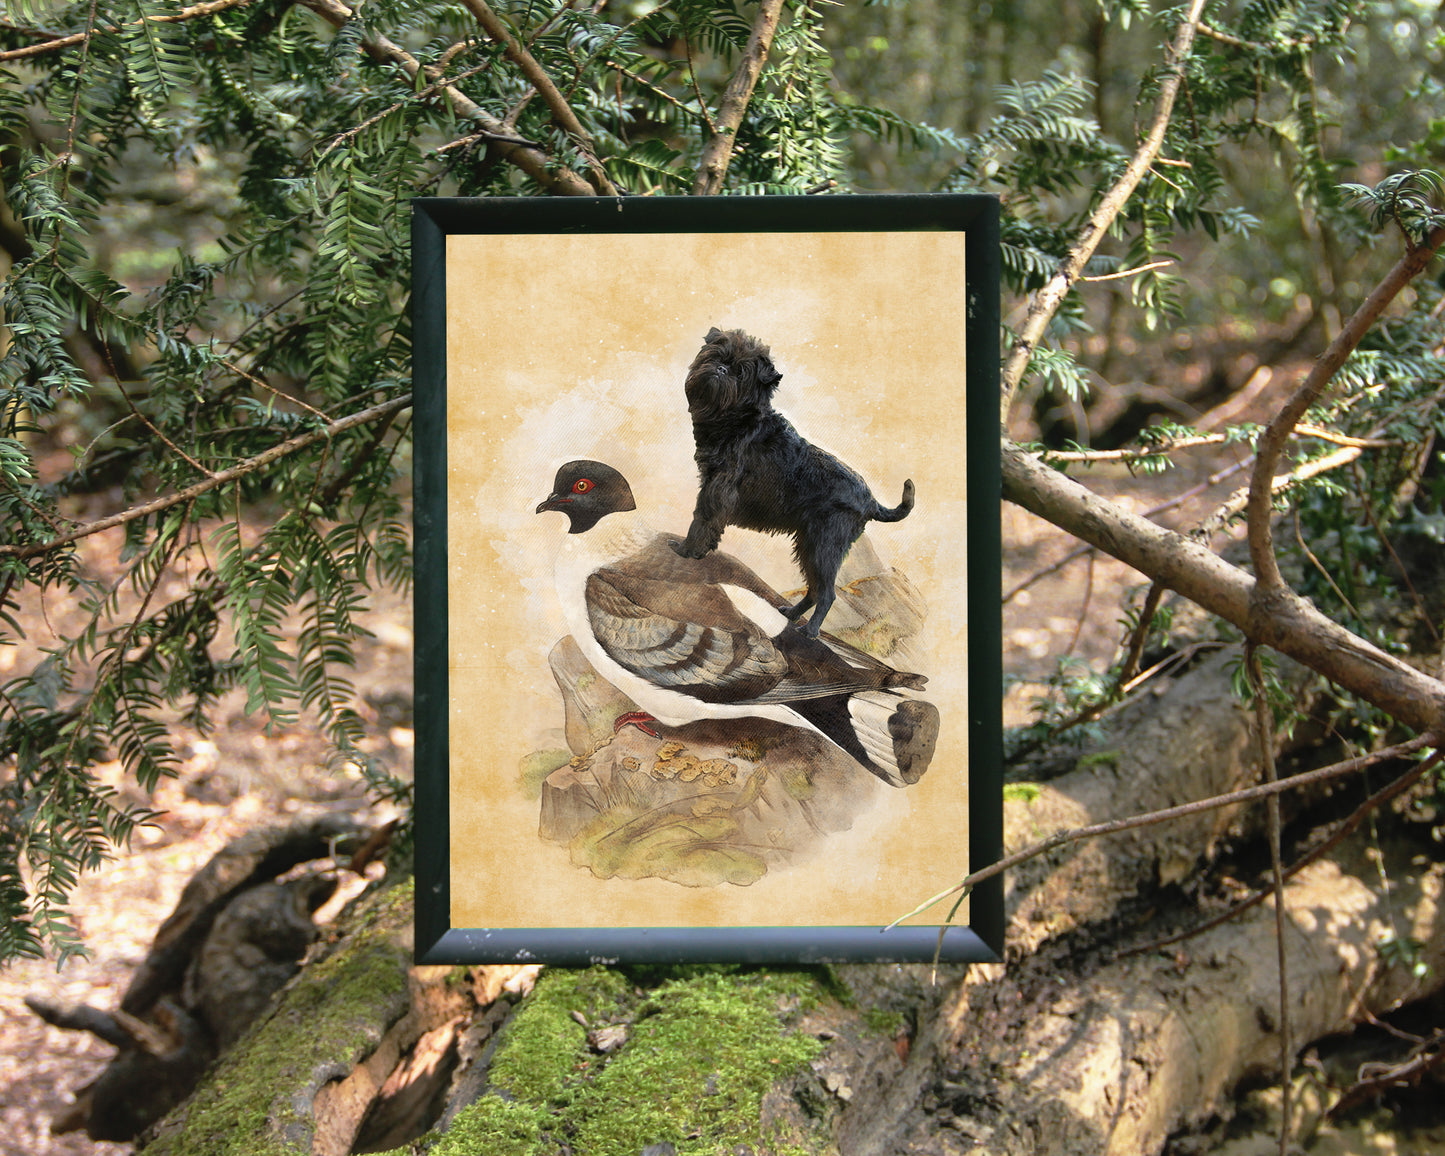 Affenpinscher and Pigeon Vintage Art by Nobility Dogs